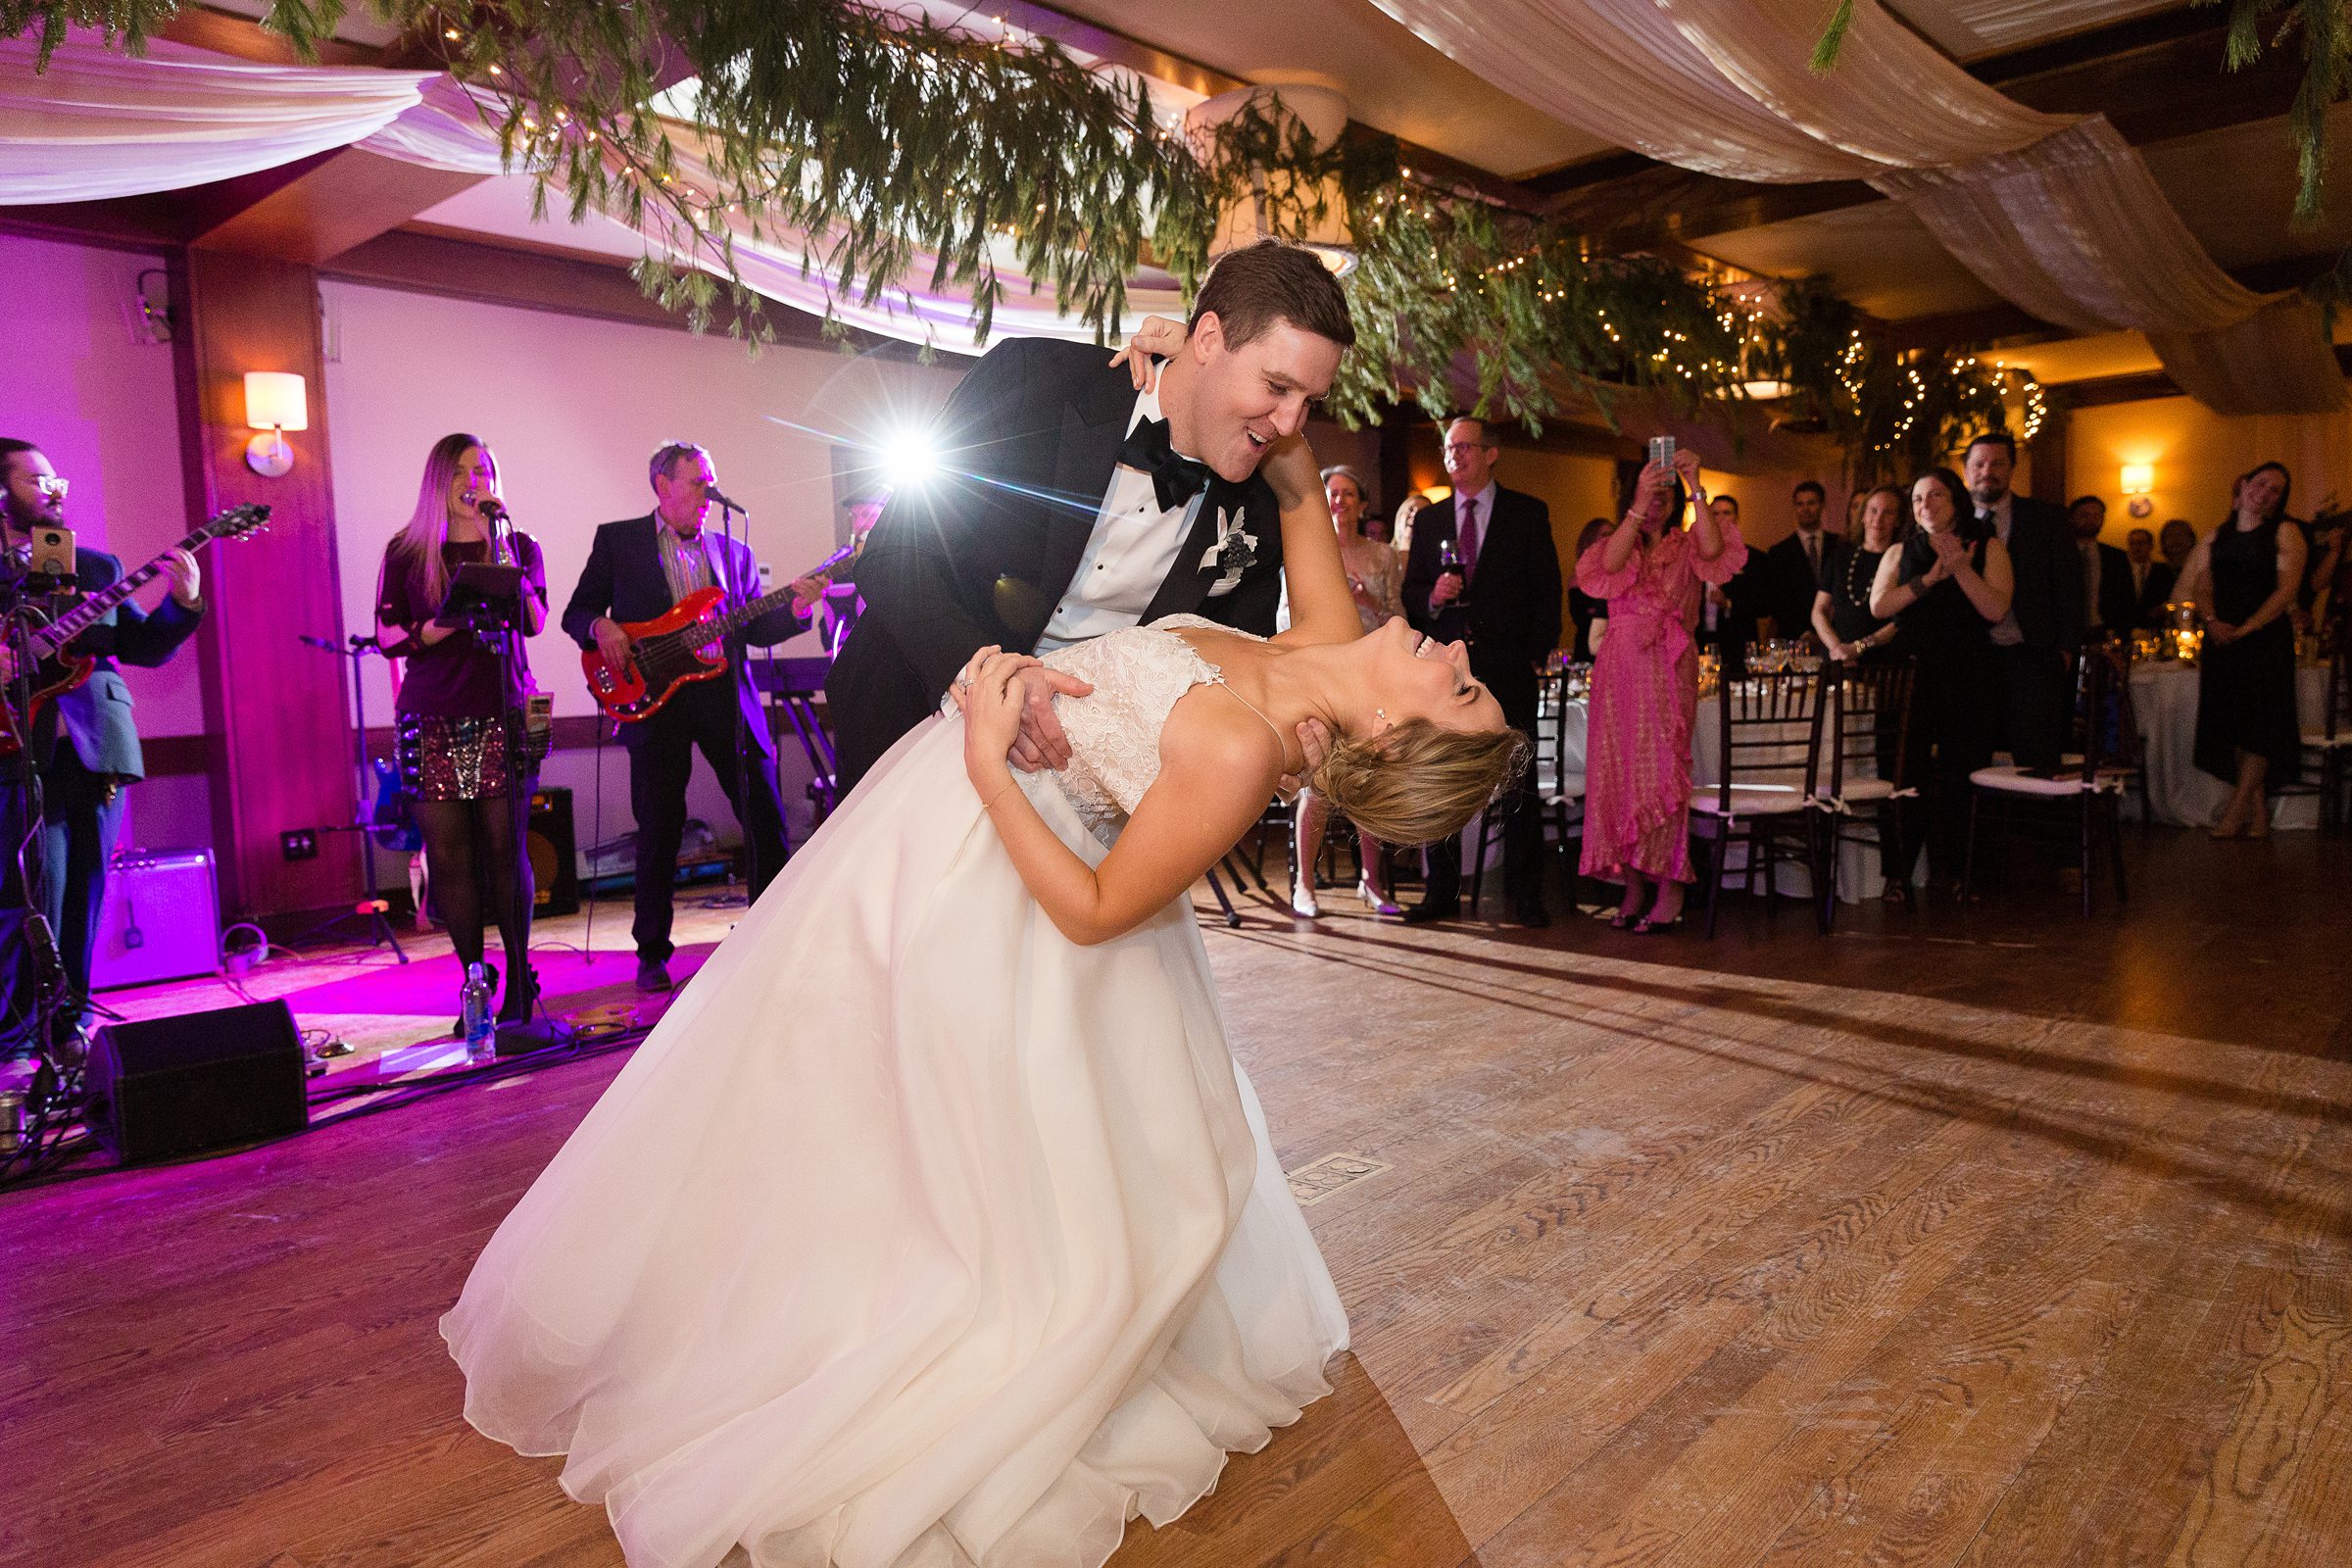 Bride and groom first dance during reception